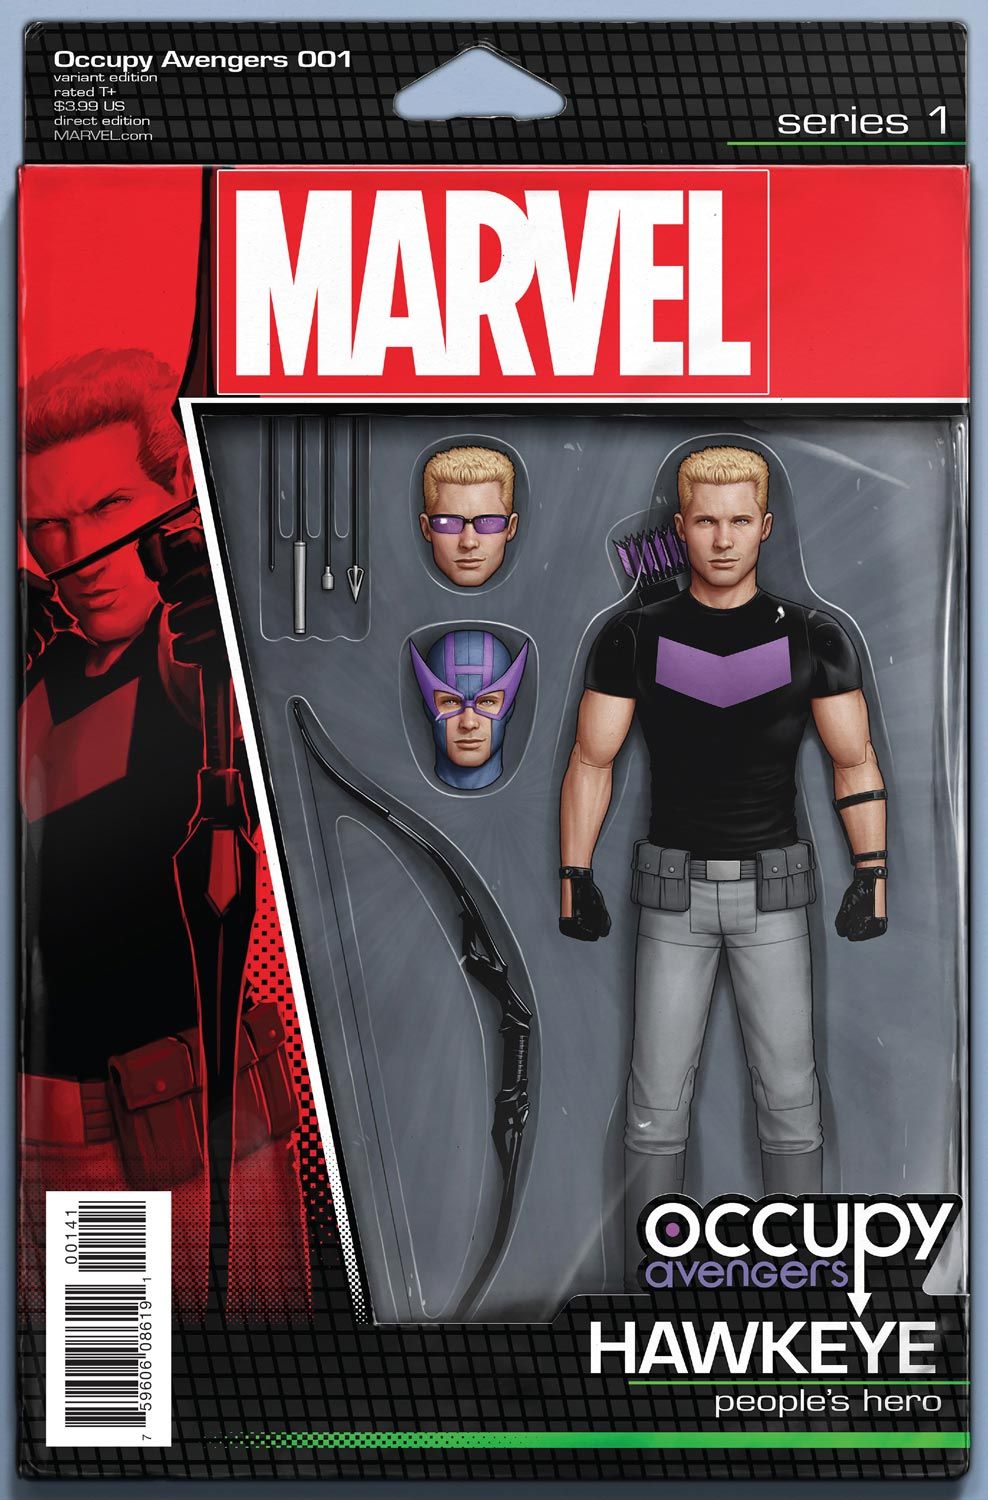 occupy_avengers_1_christopher_action_figure_variant